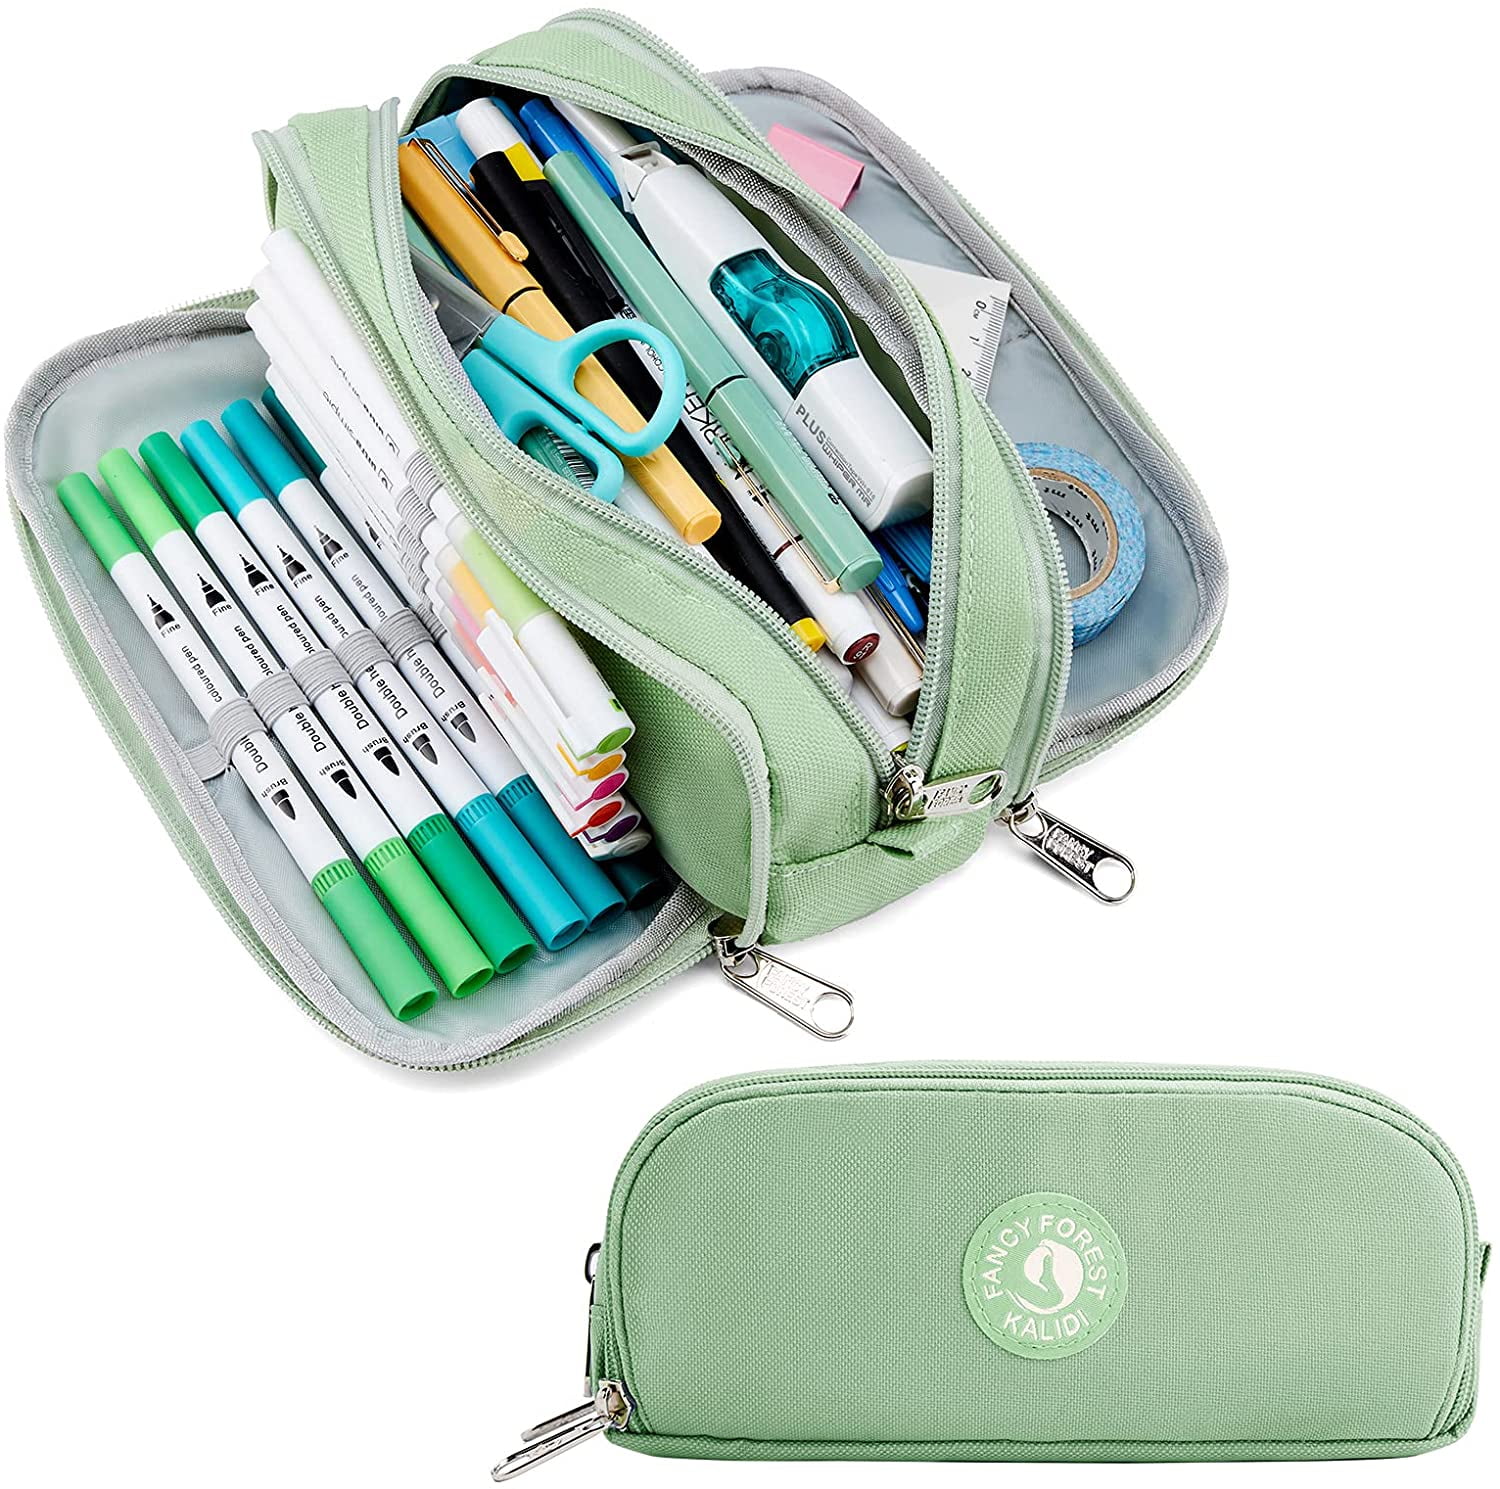 KALIDI Pencil Pouch Office College School Large Storage Pen Bag 3 Compartment Pencil Cases for Adults School Teen Girl Boy Large Capacity Pencil Case 